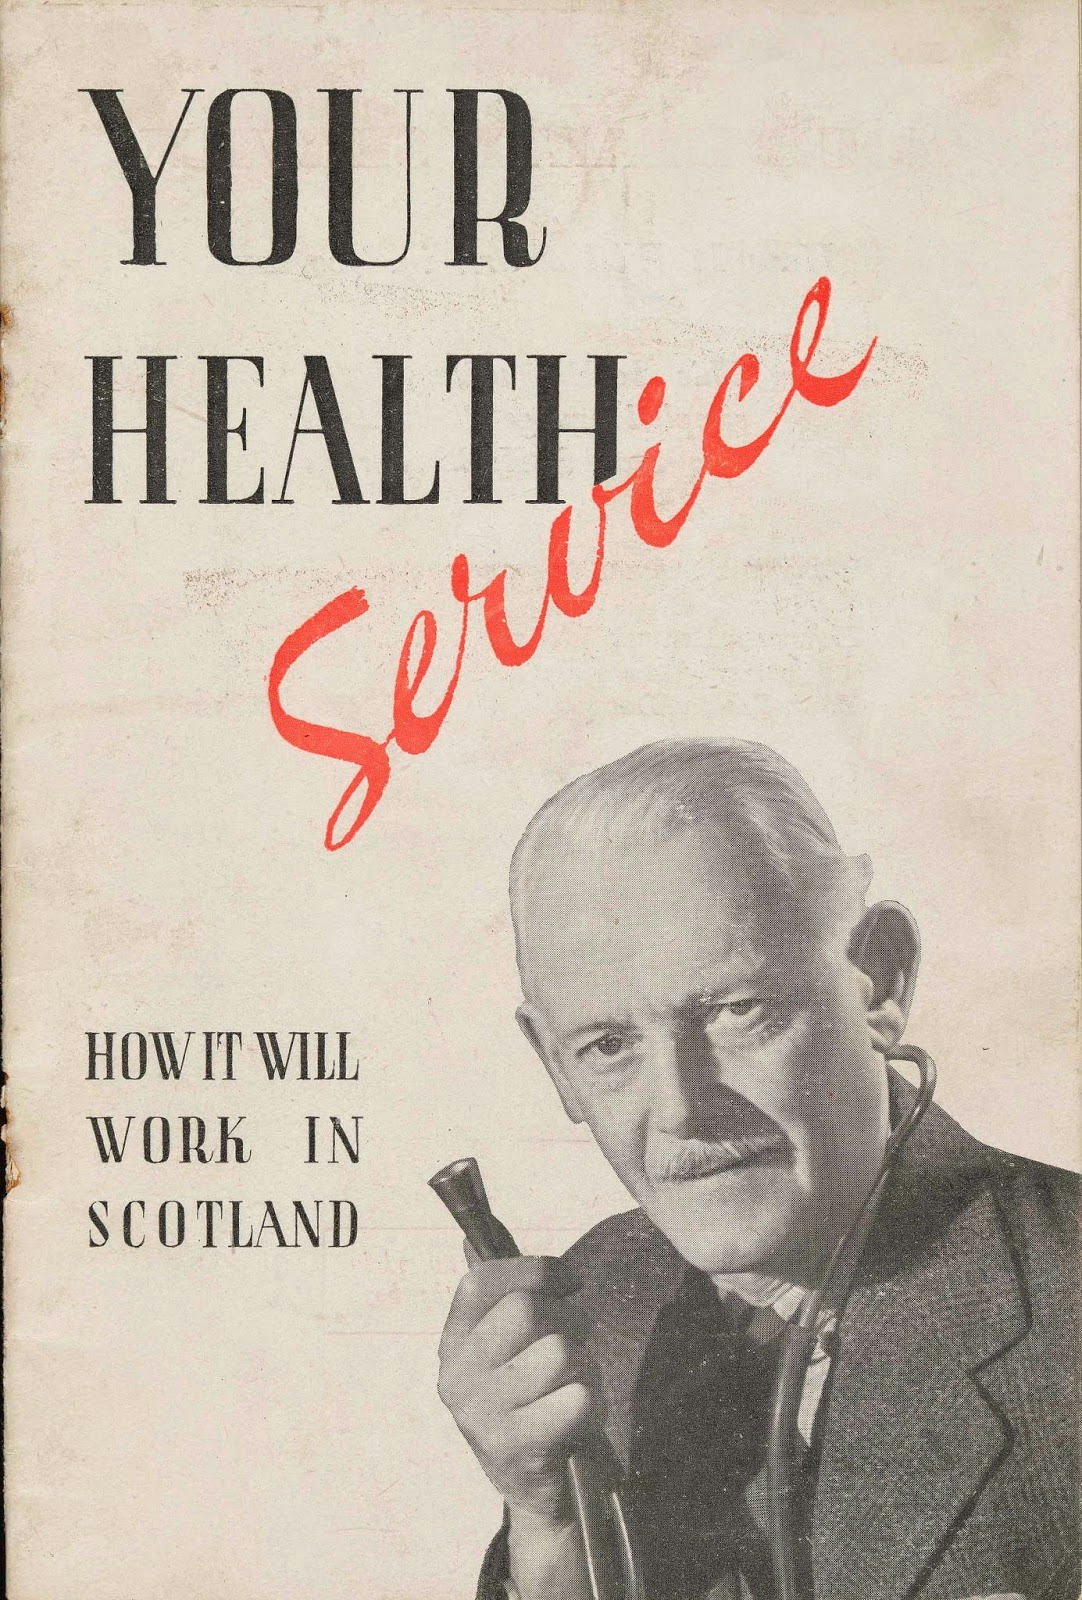 The front of a pamphlet on "Your Health Service: How it will work in Scotland." depicts an elderly doctor with moustache and stethoscope.